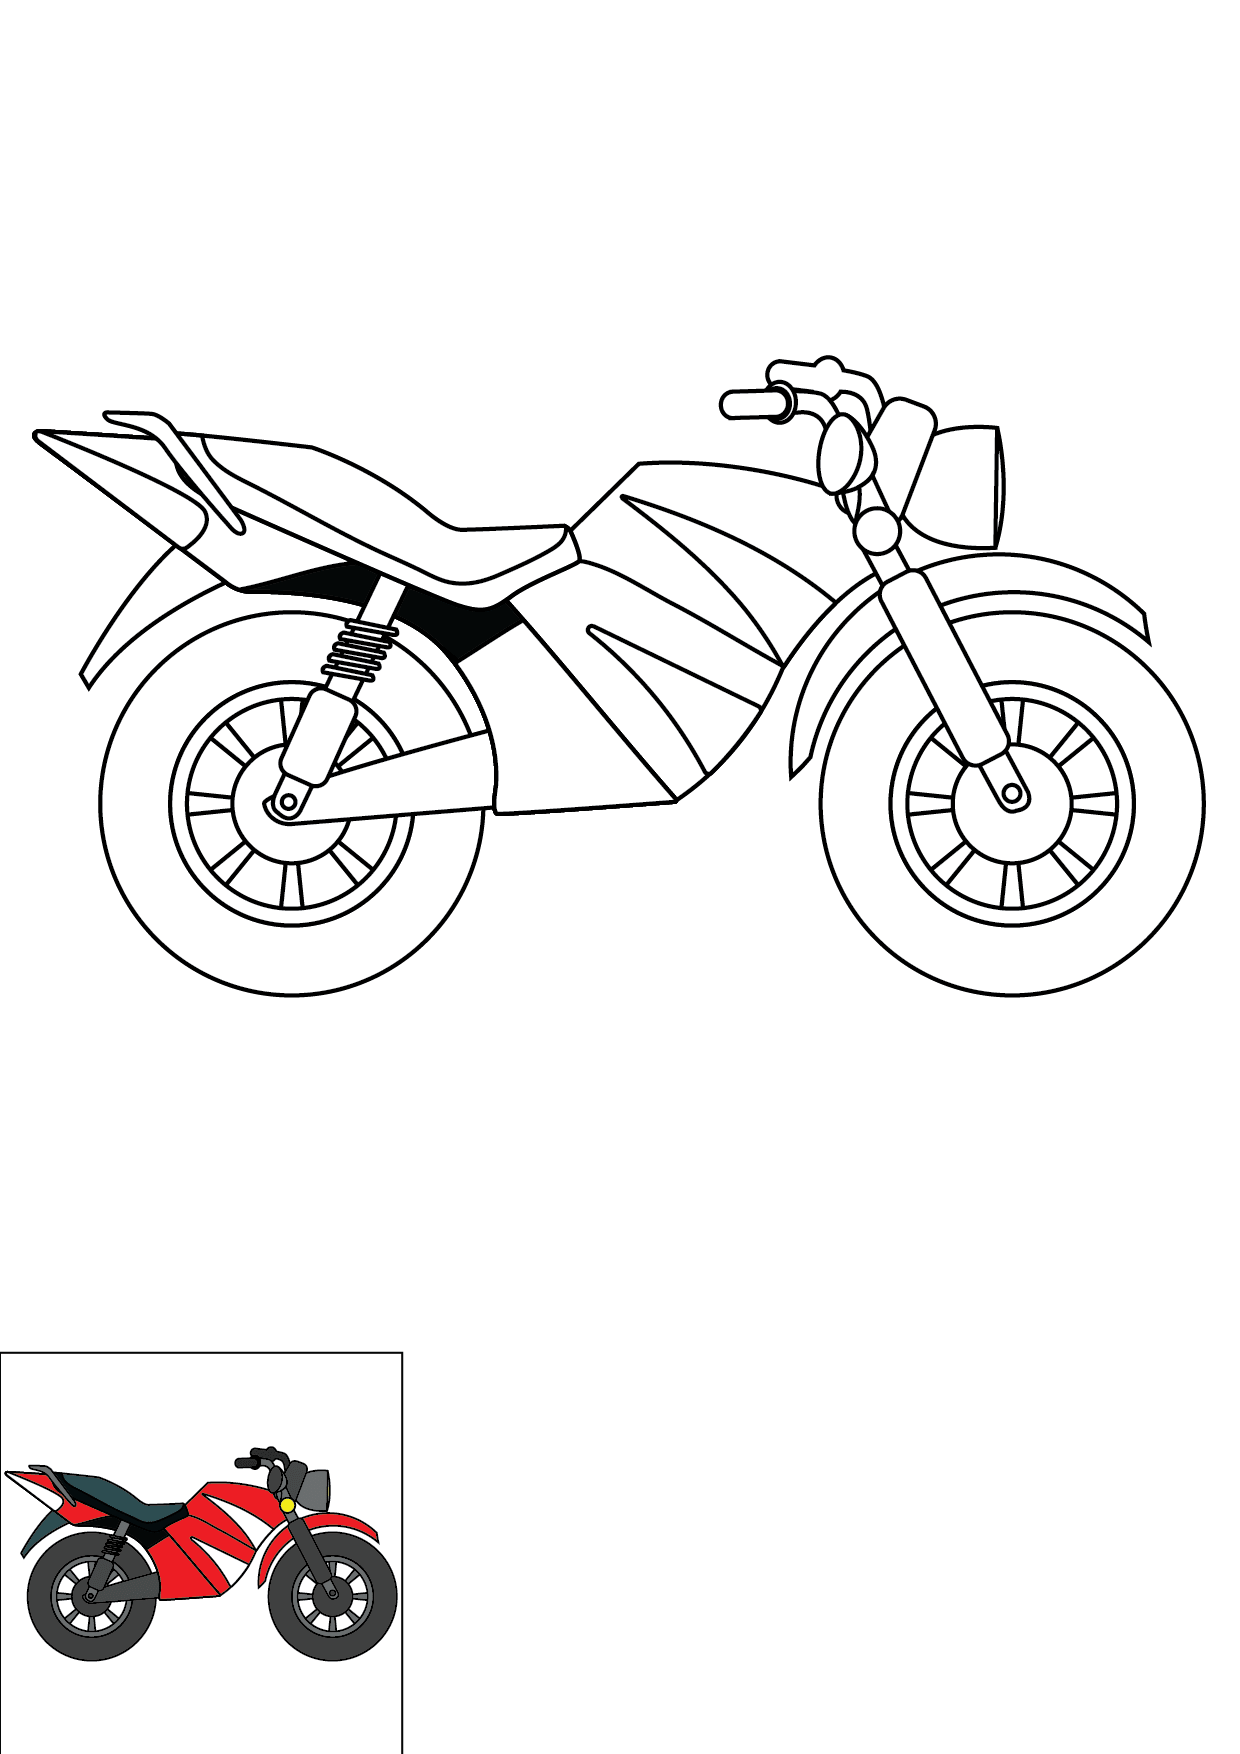 How to Draw A Motorcycle Step by Step Printable Color